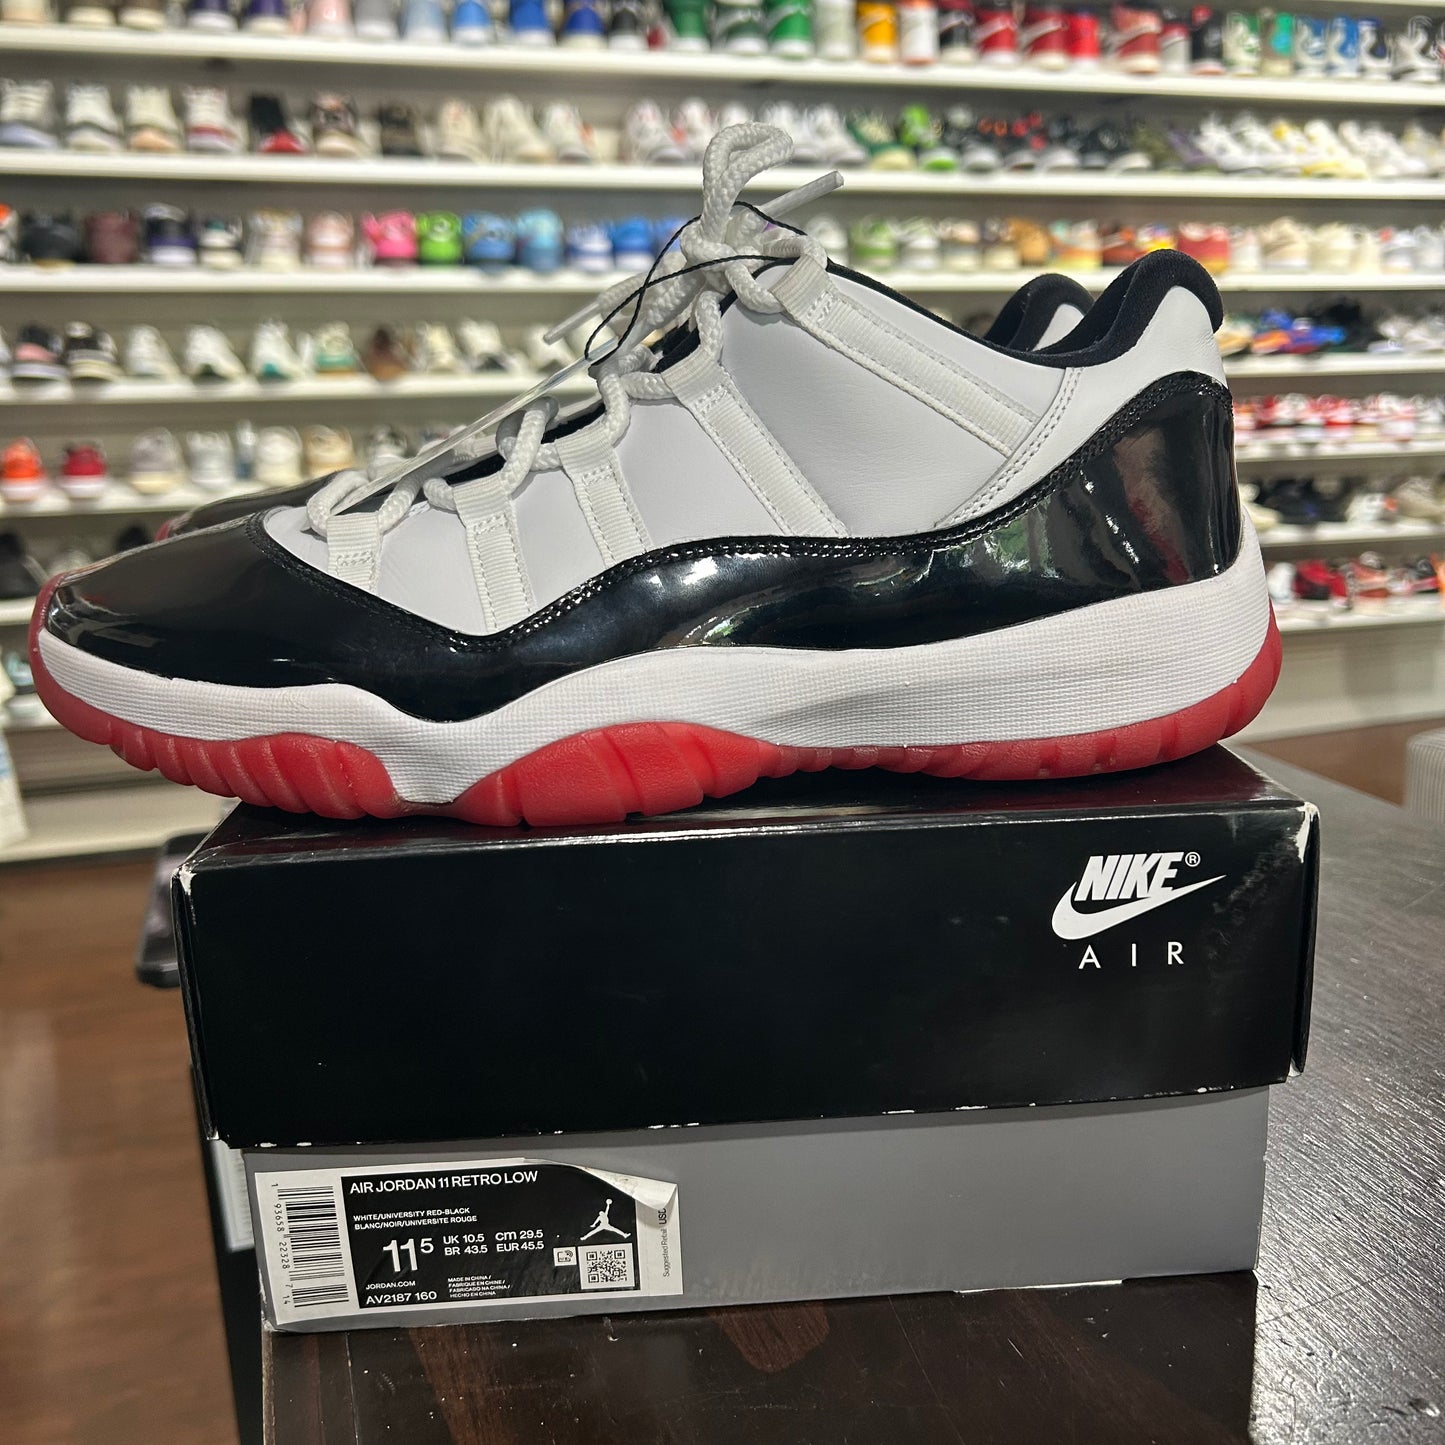 *USED* Air Jordan 11 Low Concord Bred (SIZE 11.5)